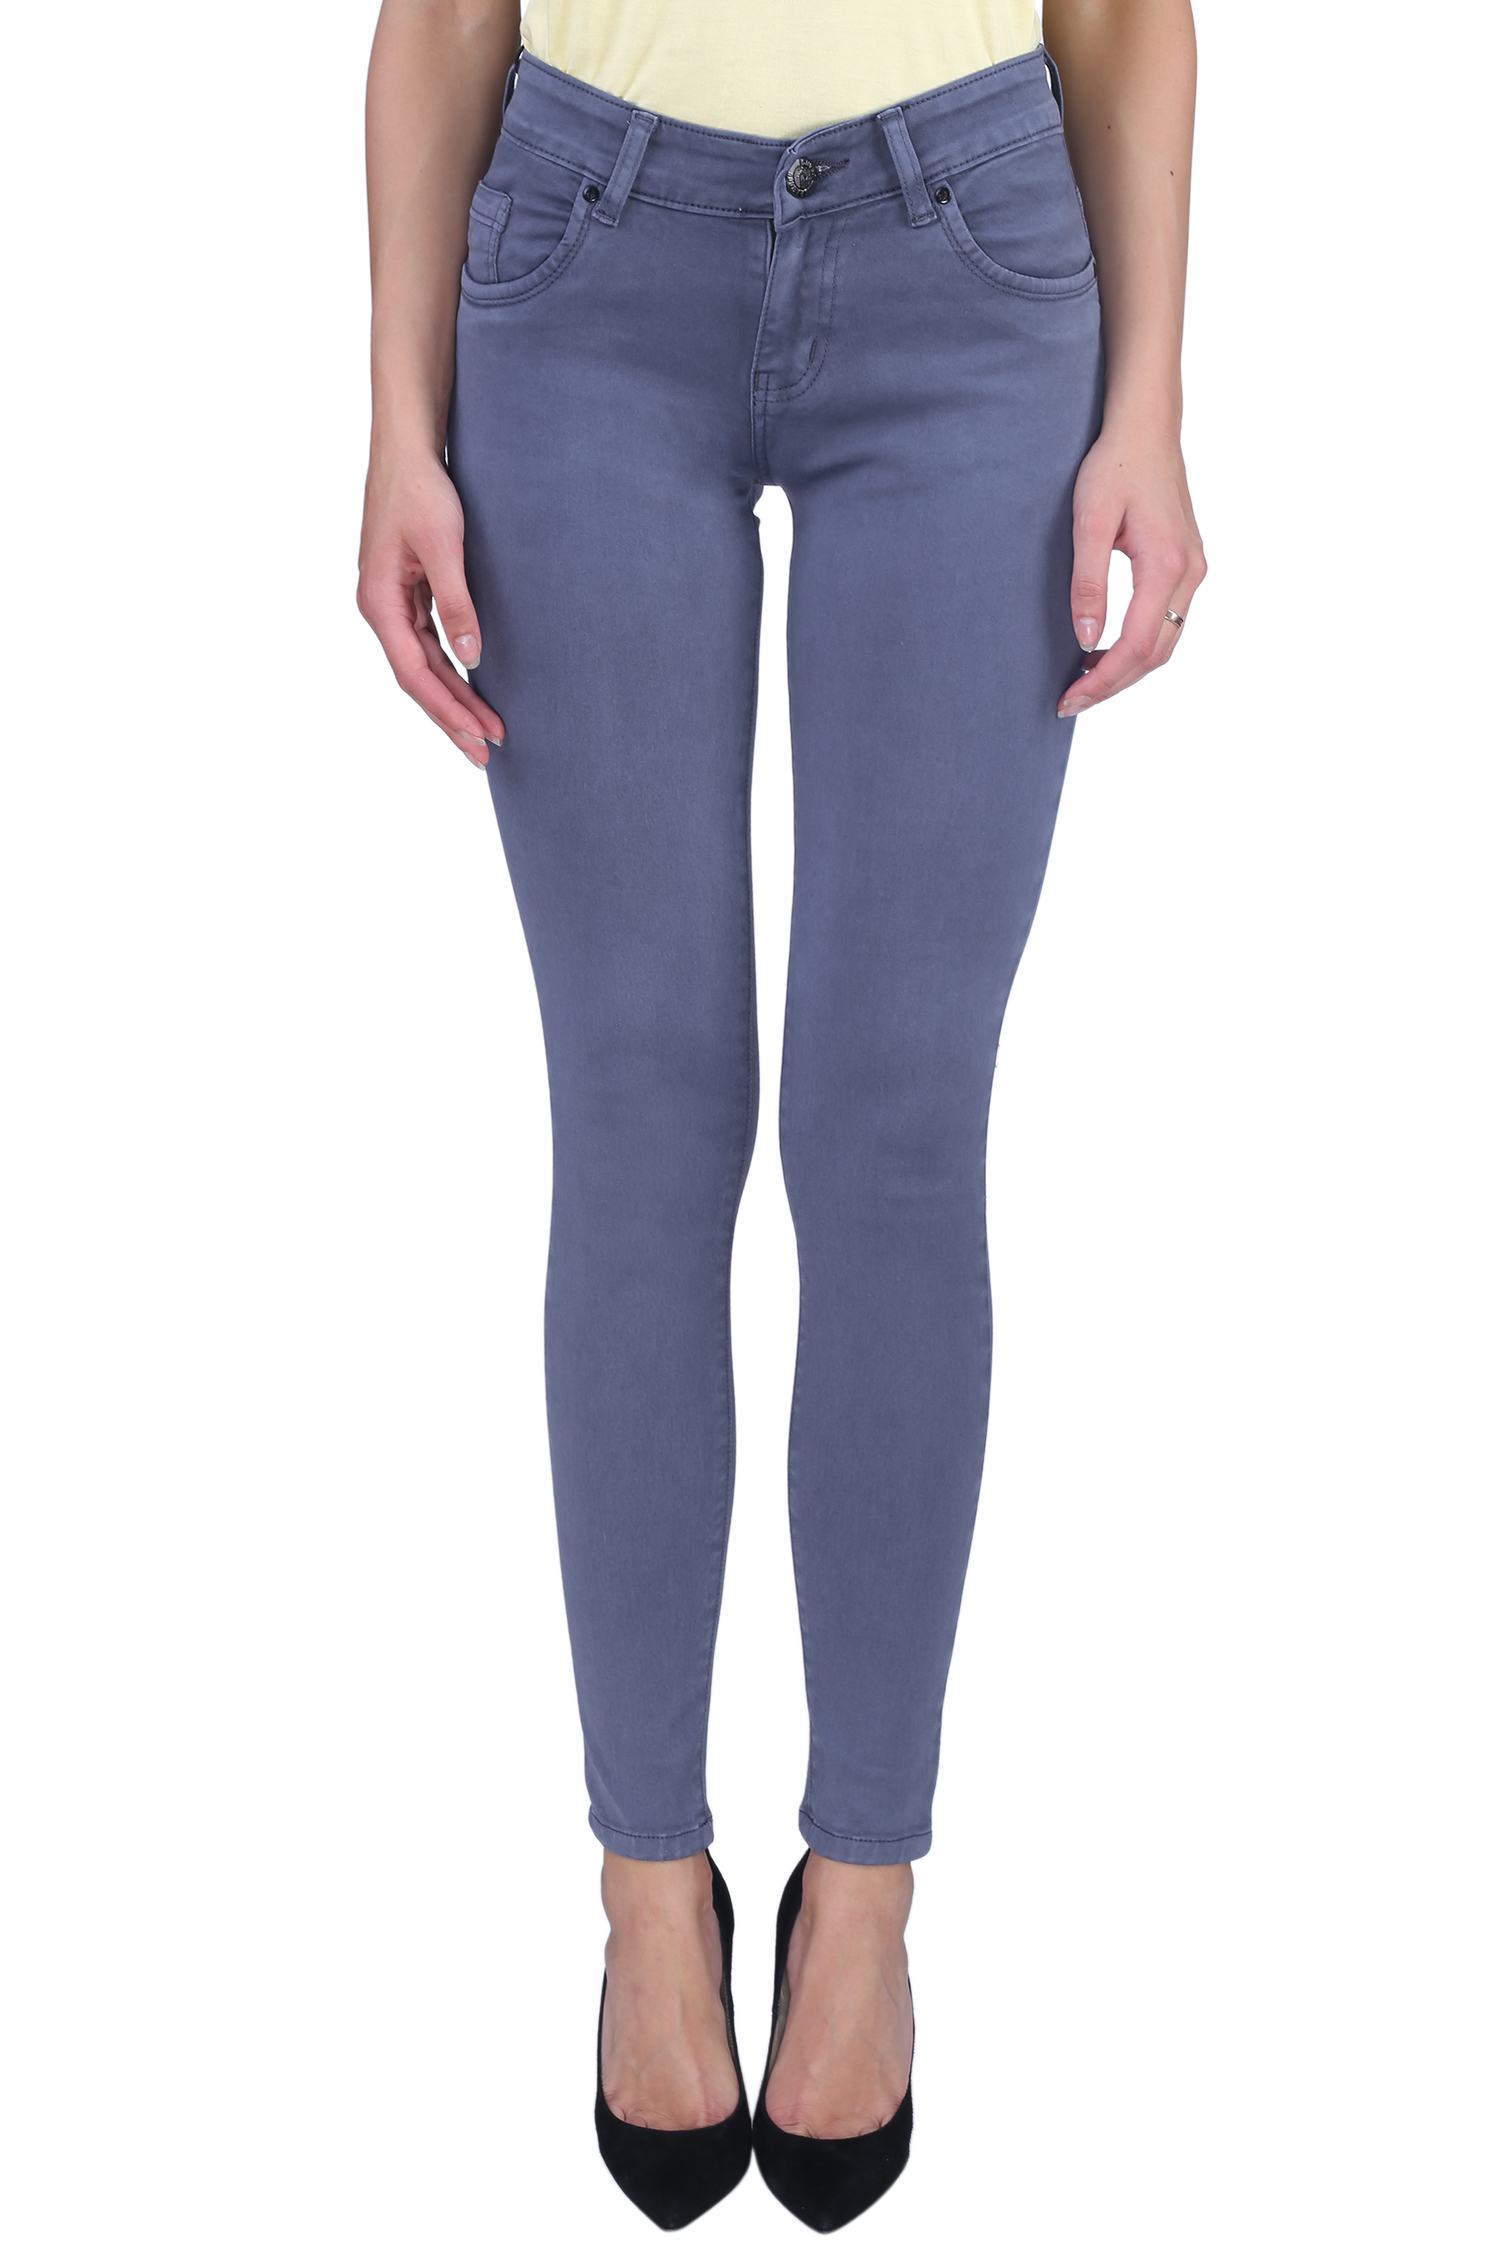 grey ankle length jeans